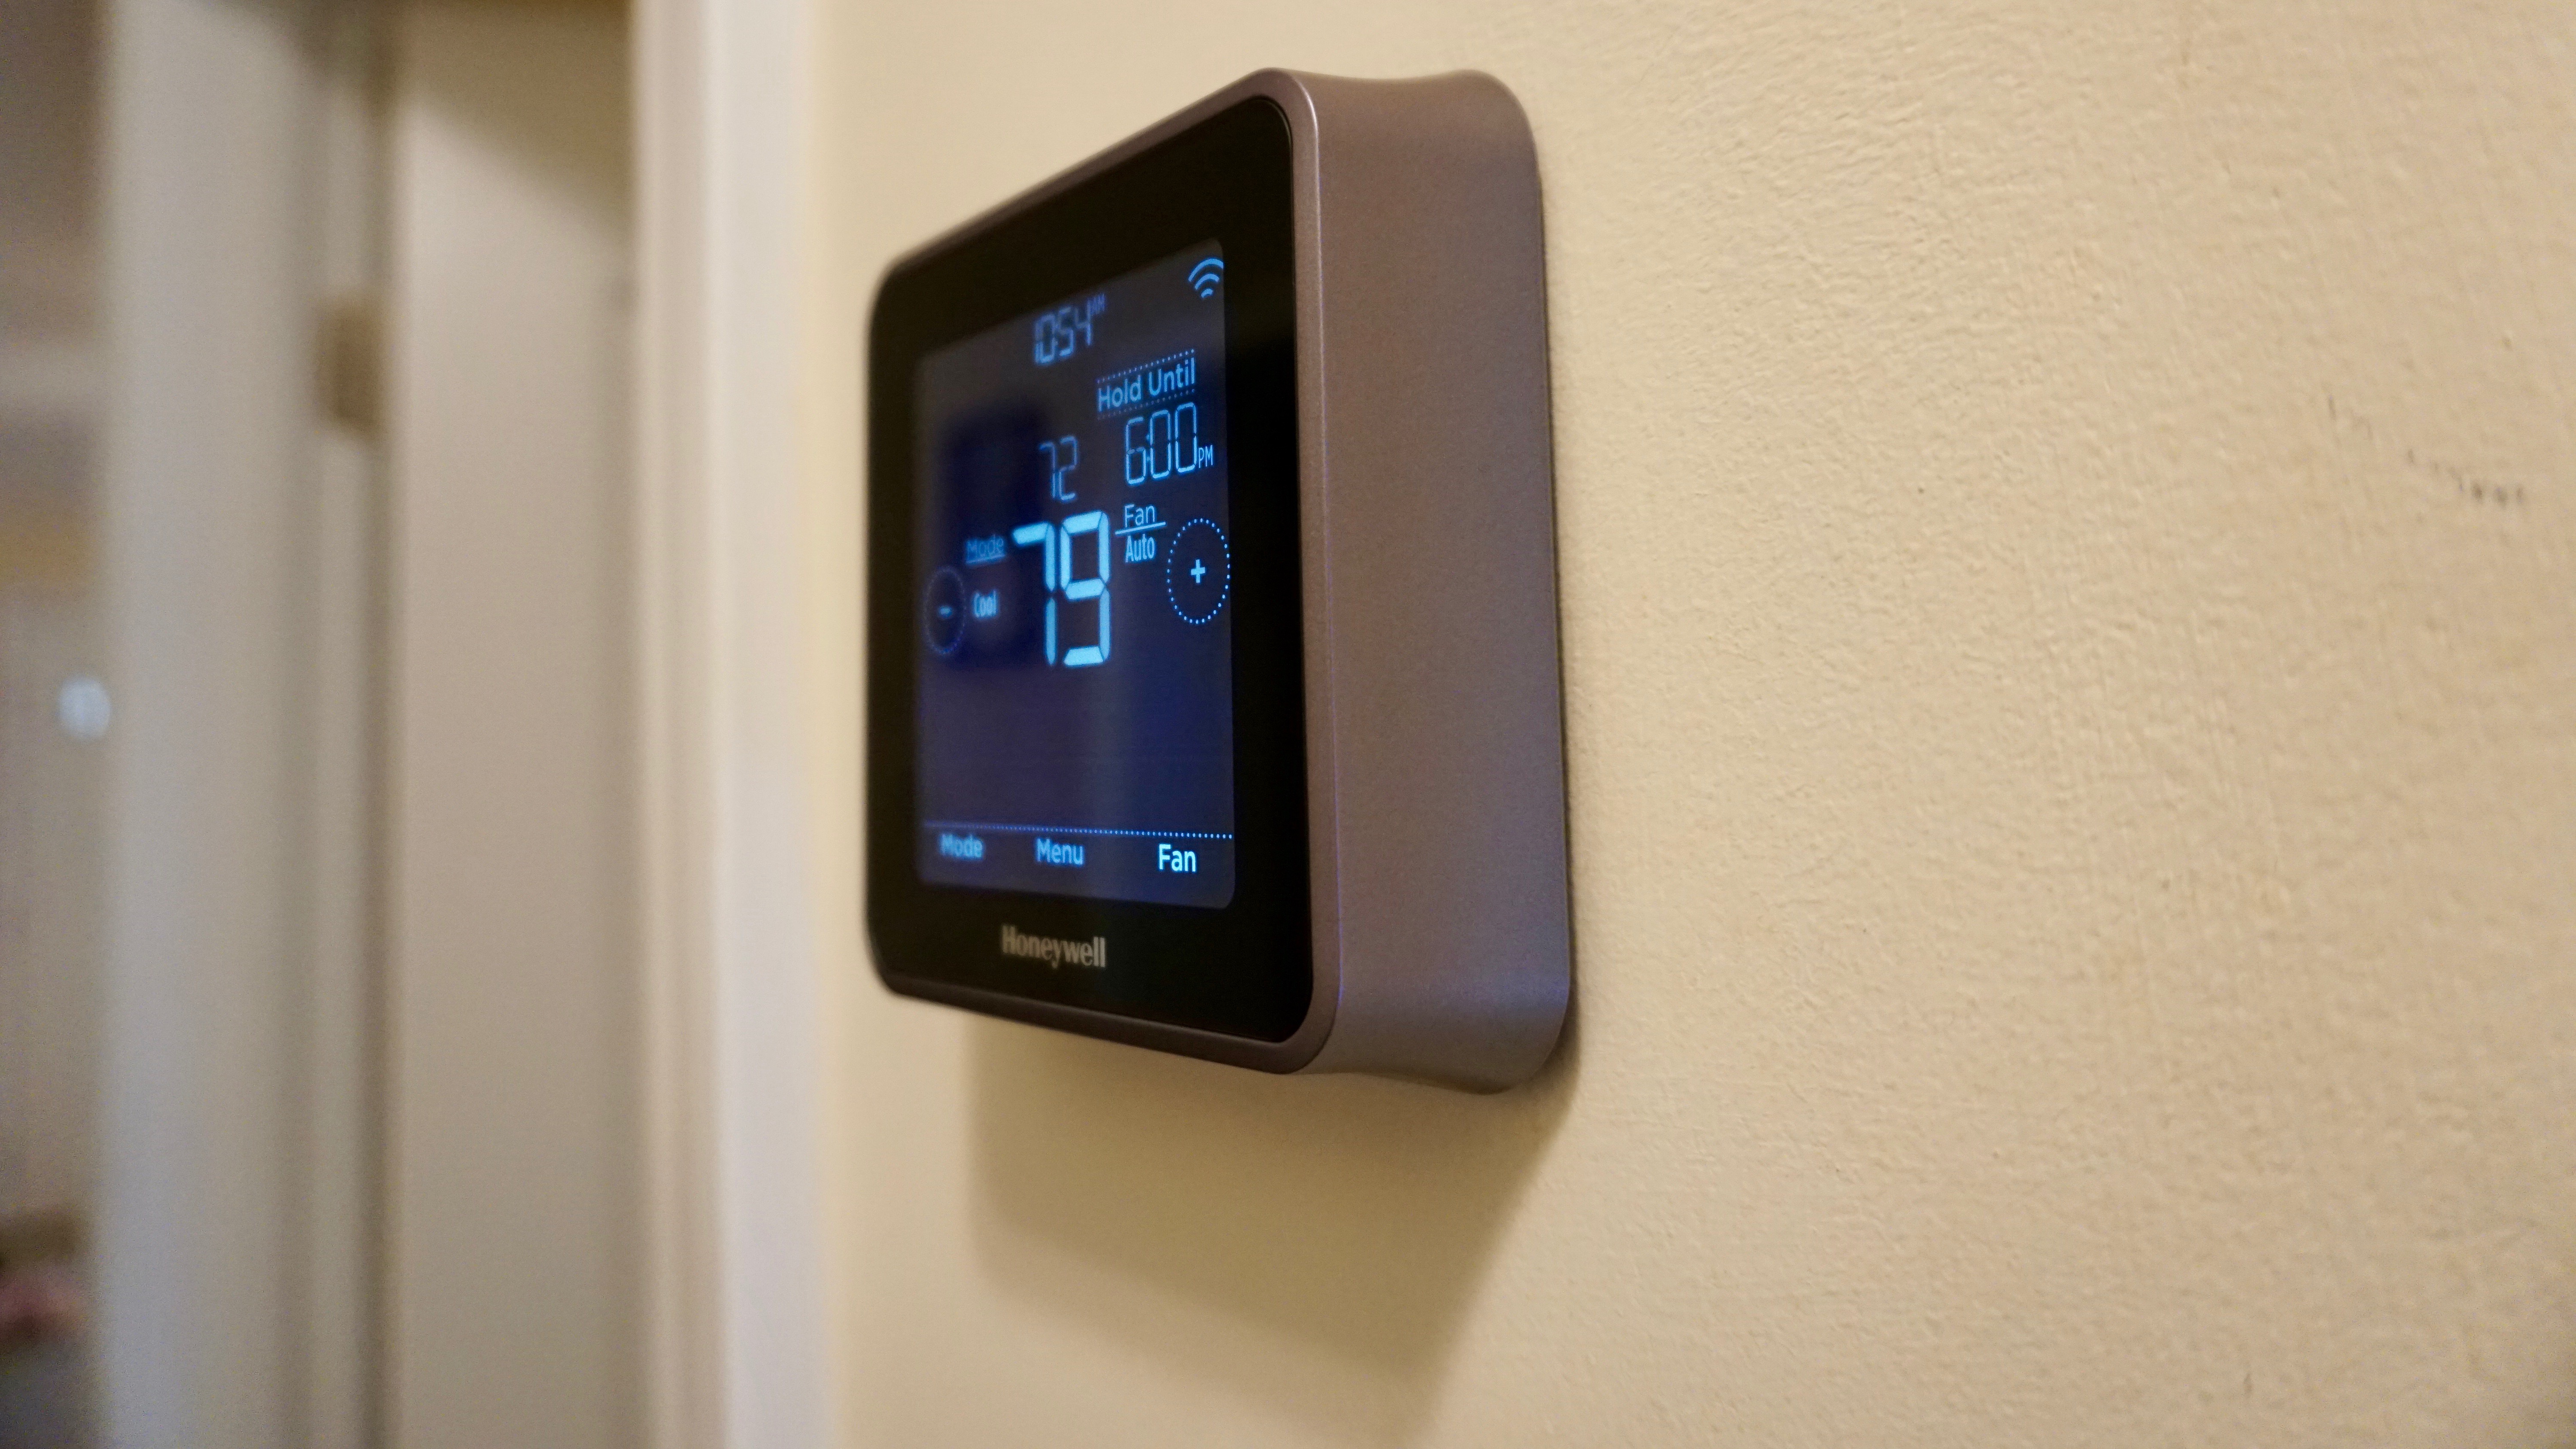 honeywell thermostat screen lights up but no display